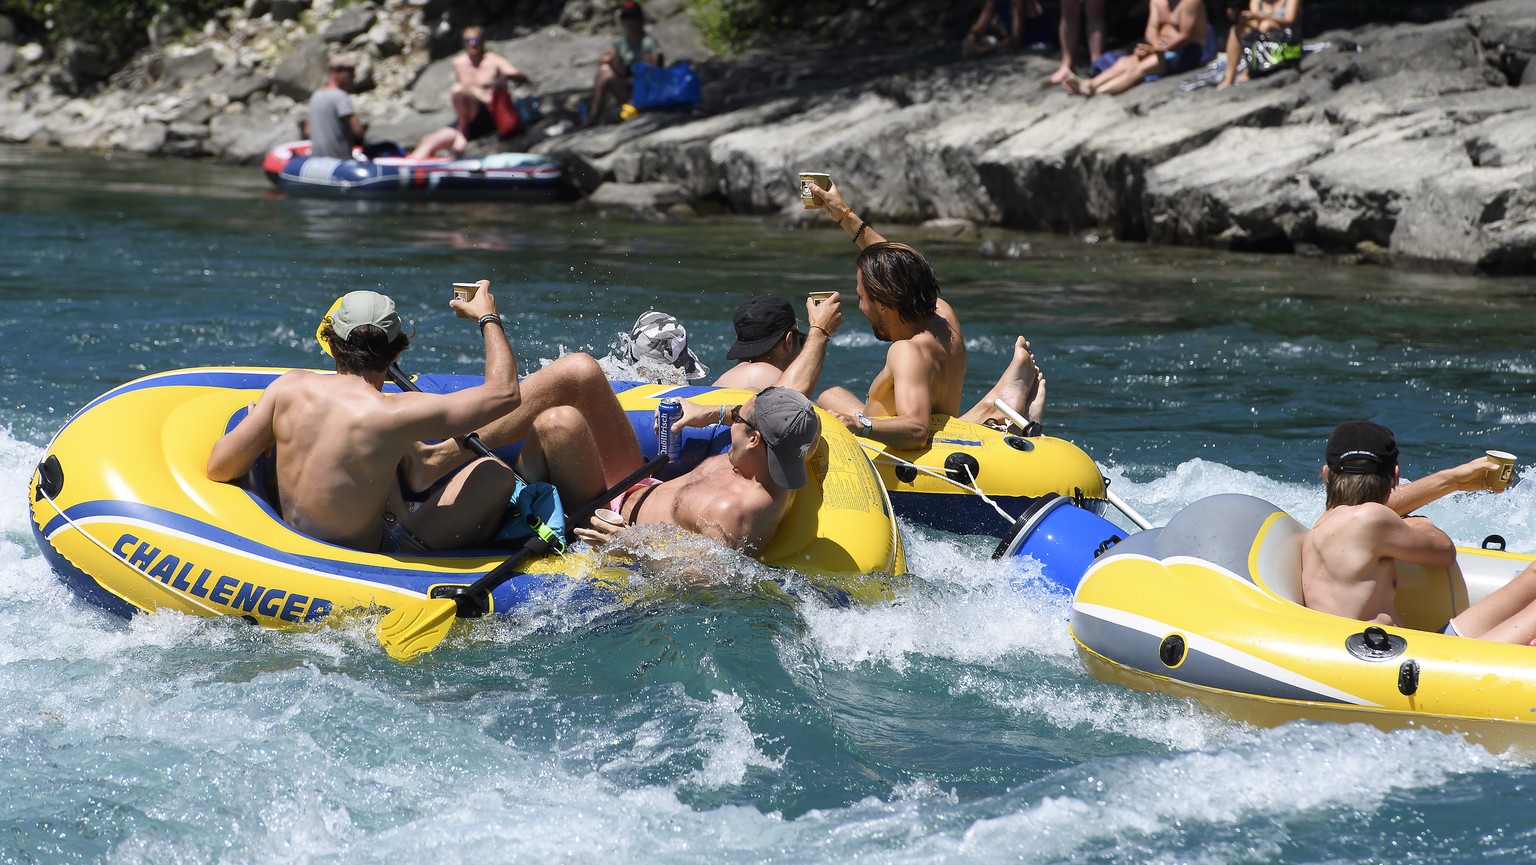 People on inflatable boats enjoy the sun on the Aare River at Uttigen, between Thun and Bern, Switzerland, during the sunny and warm weather, Monday, June 1, 2020. (KEYSTONE/Anthony Anex)